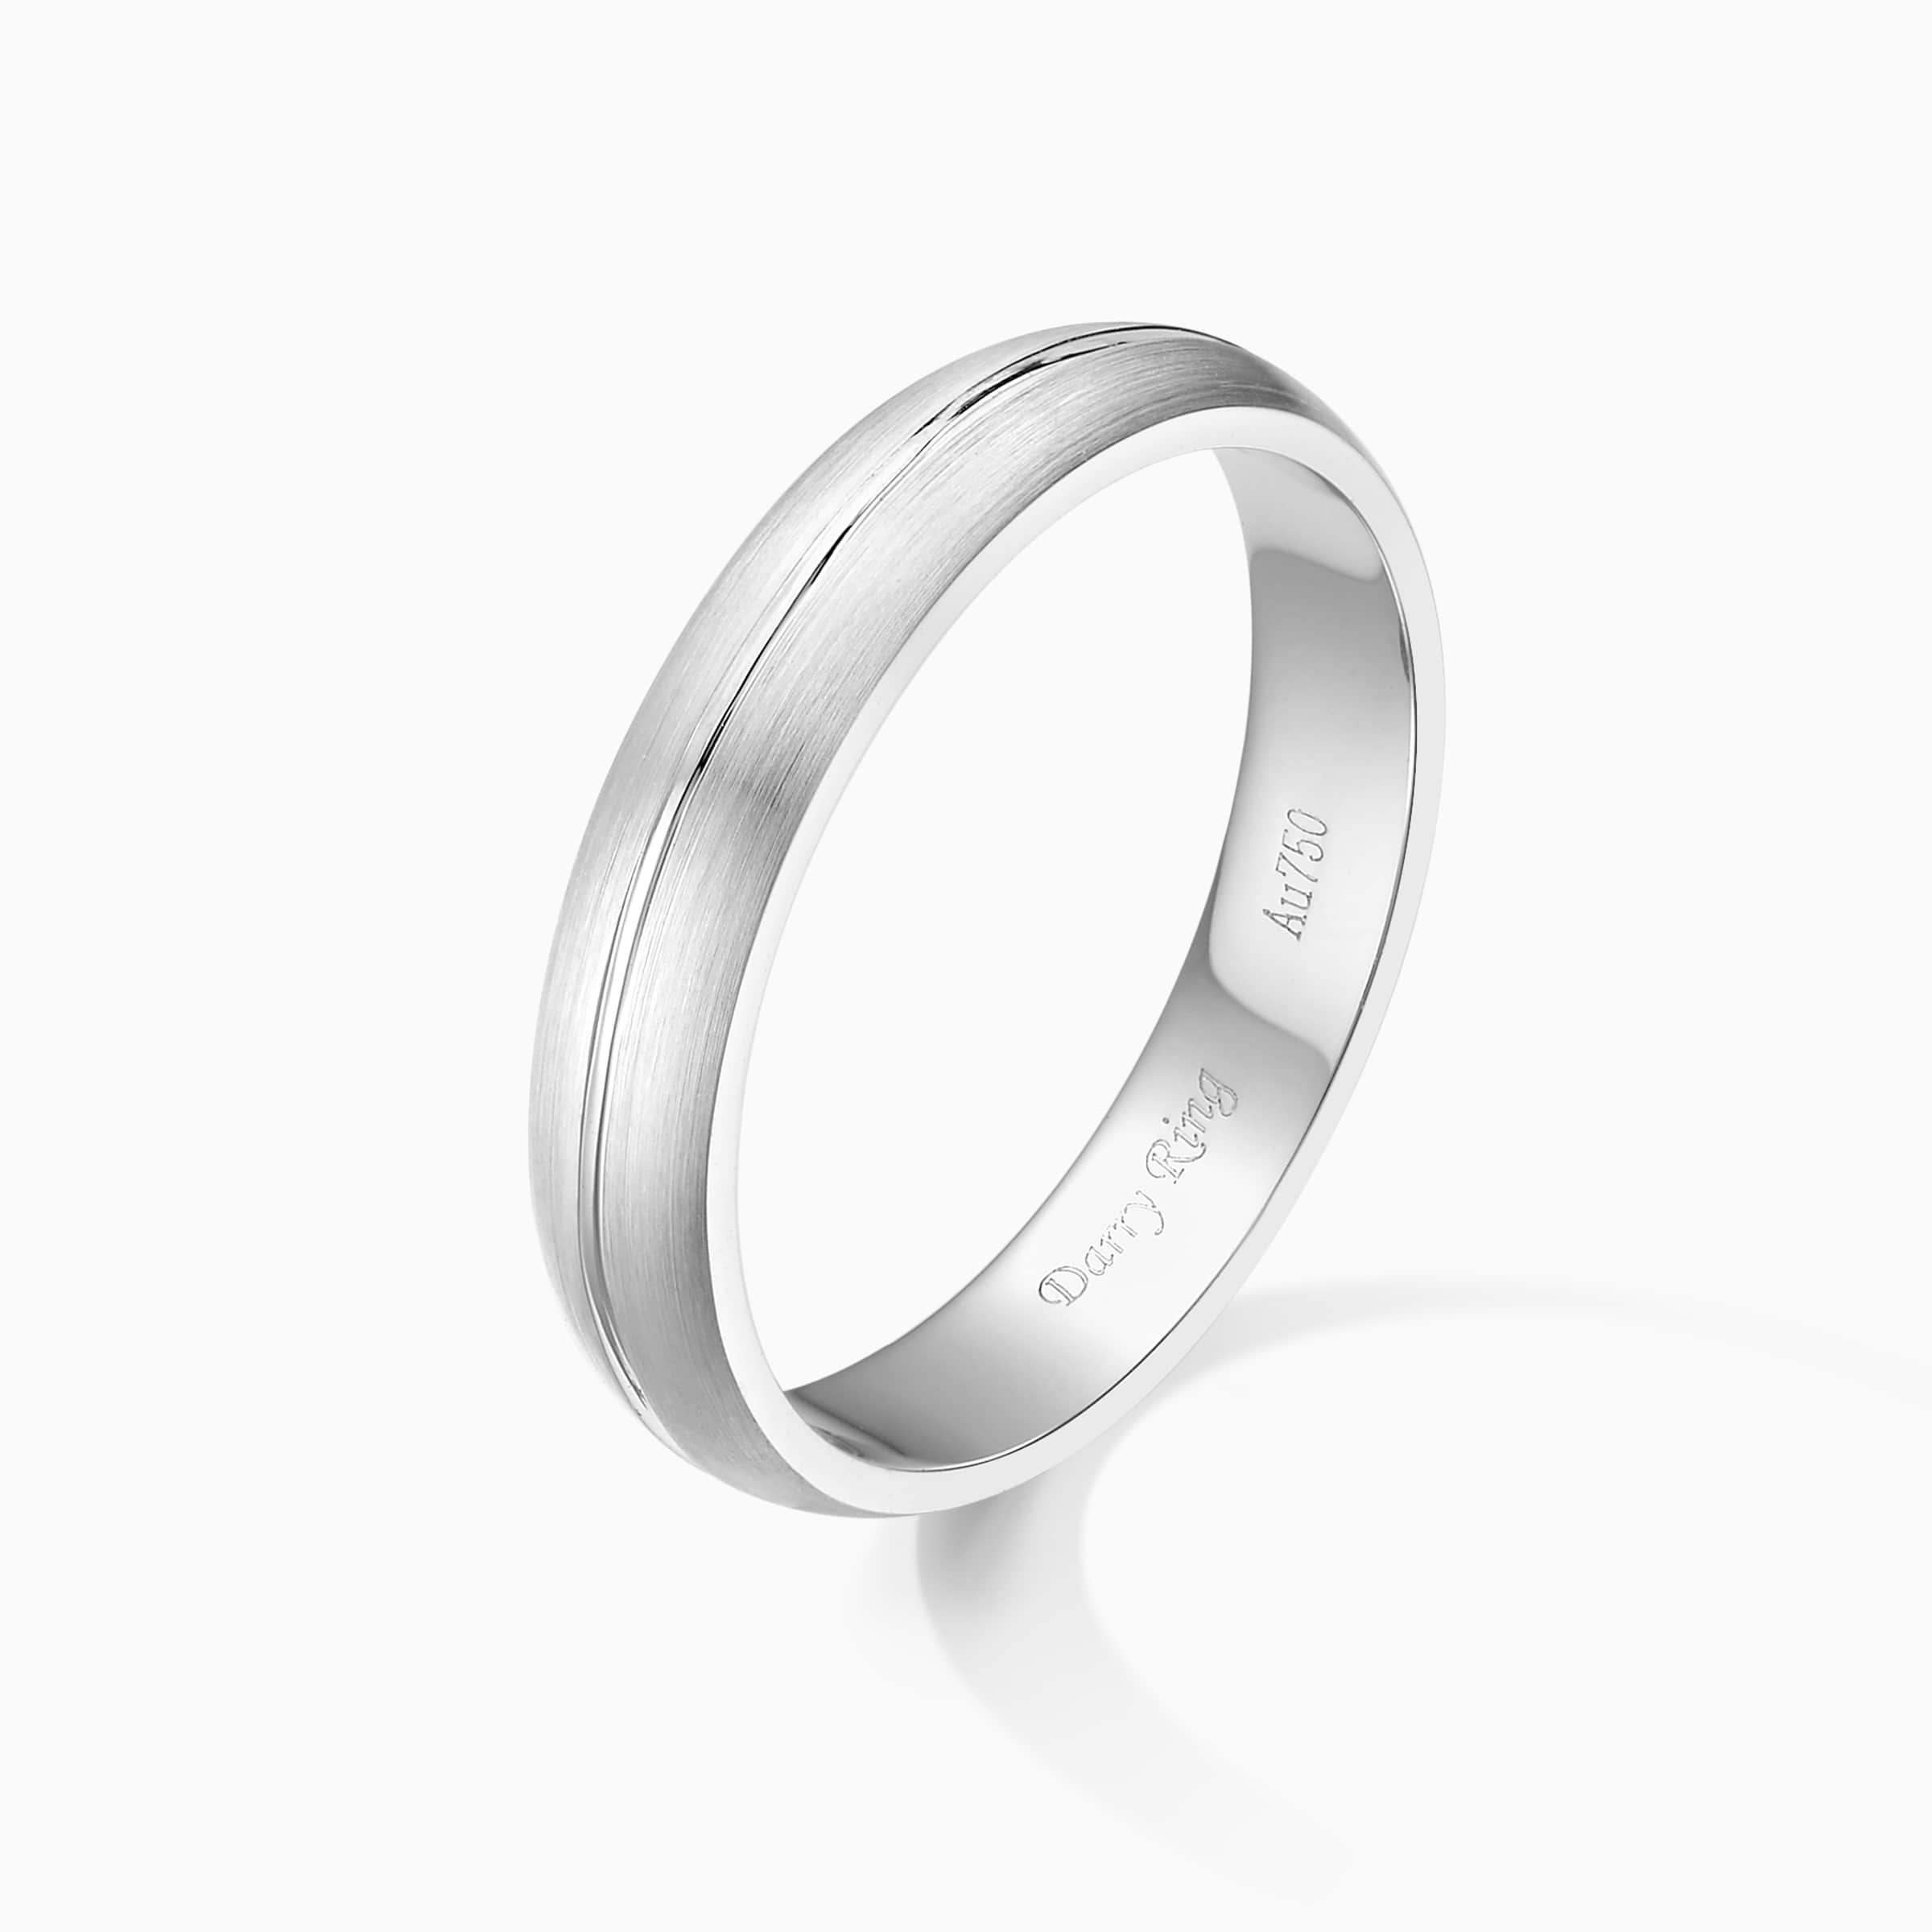 Darry Ring male wedding band side view